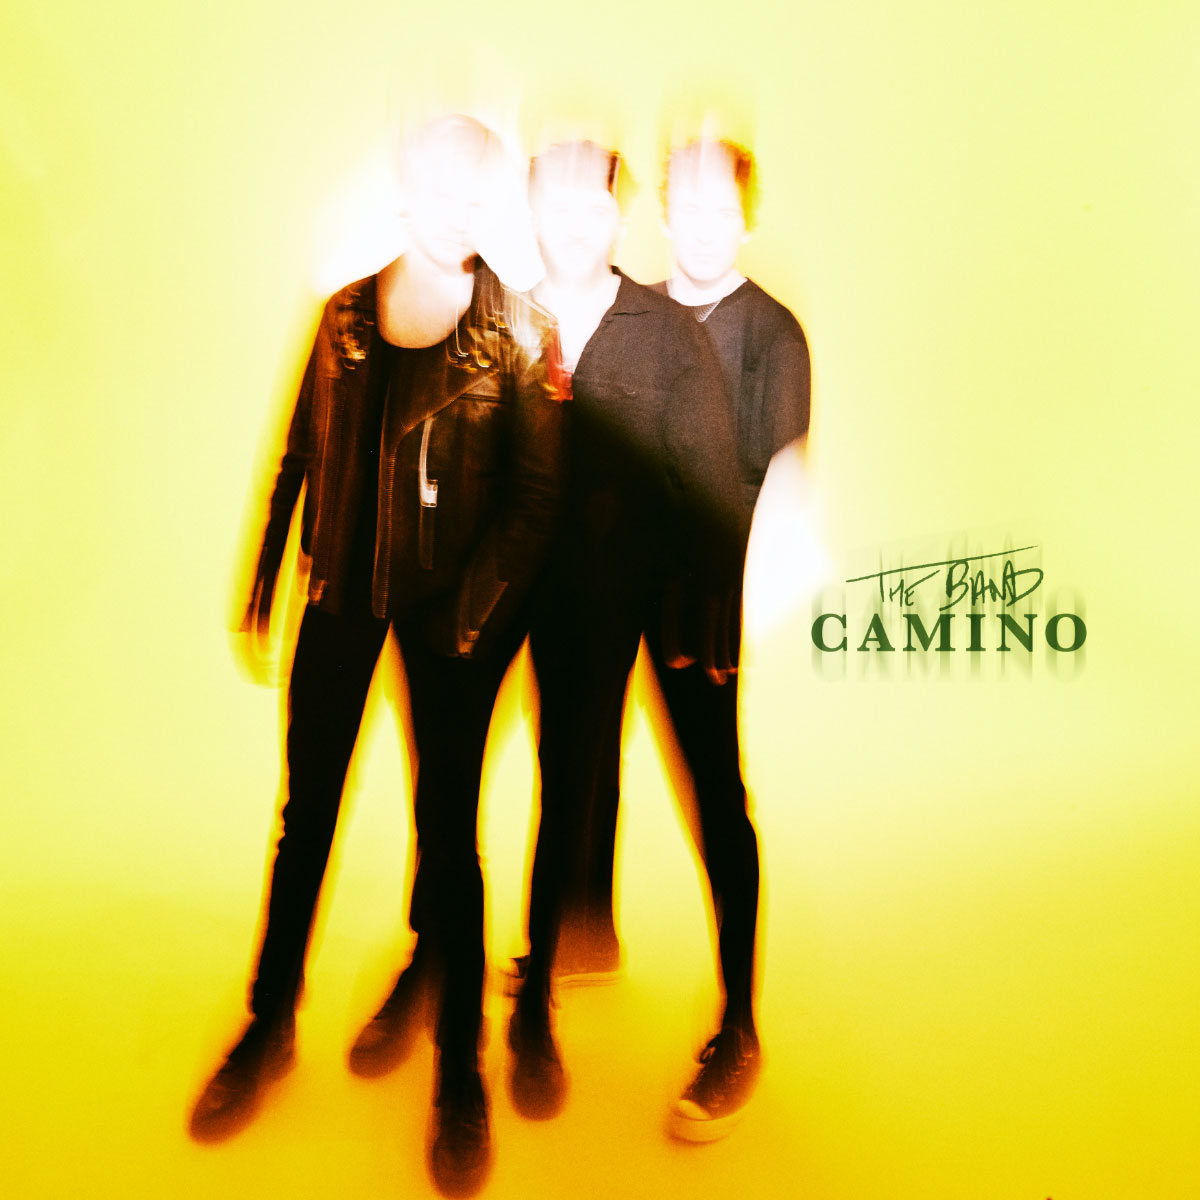 �The Band Camino� cover art